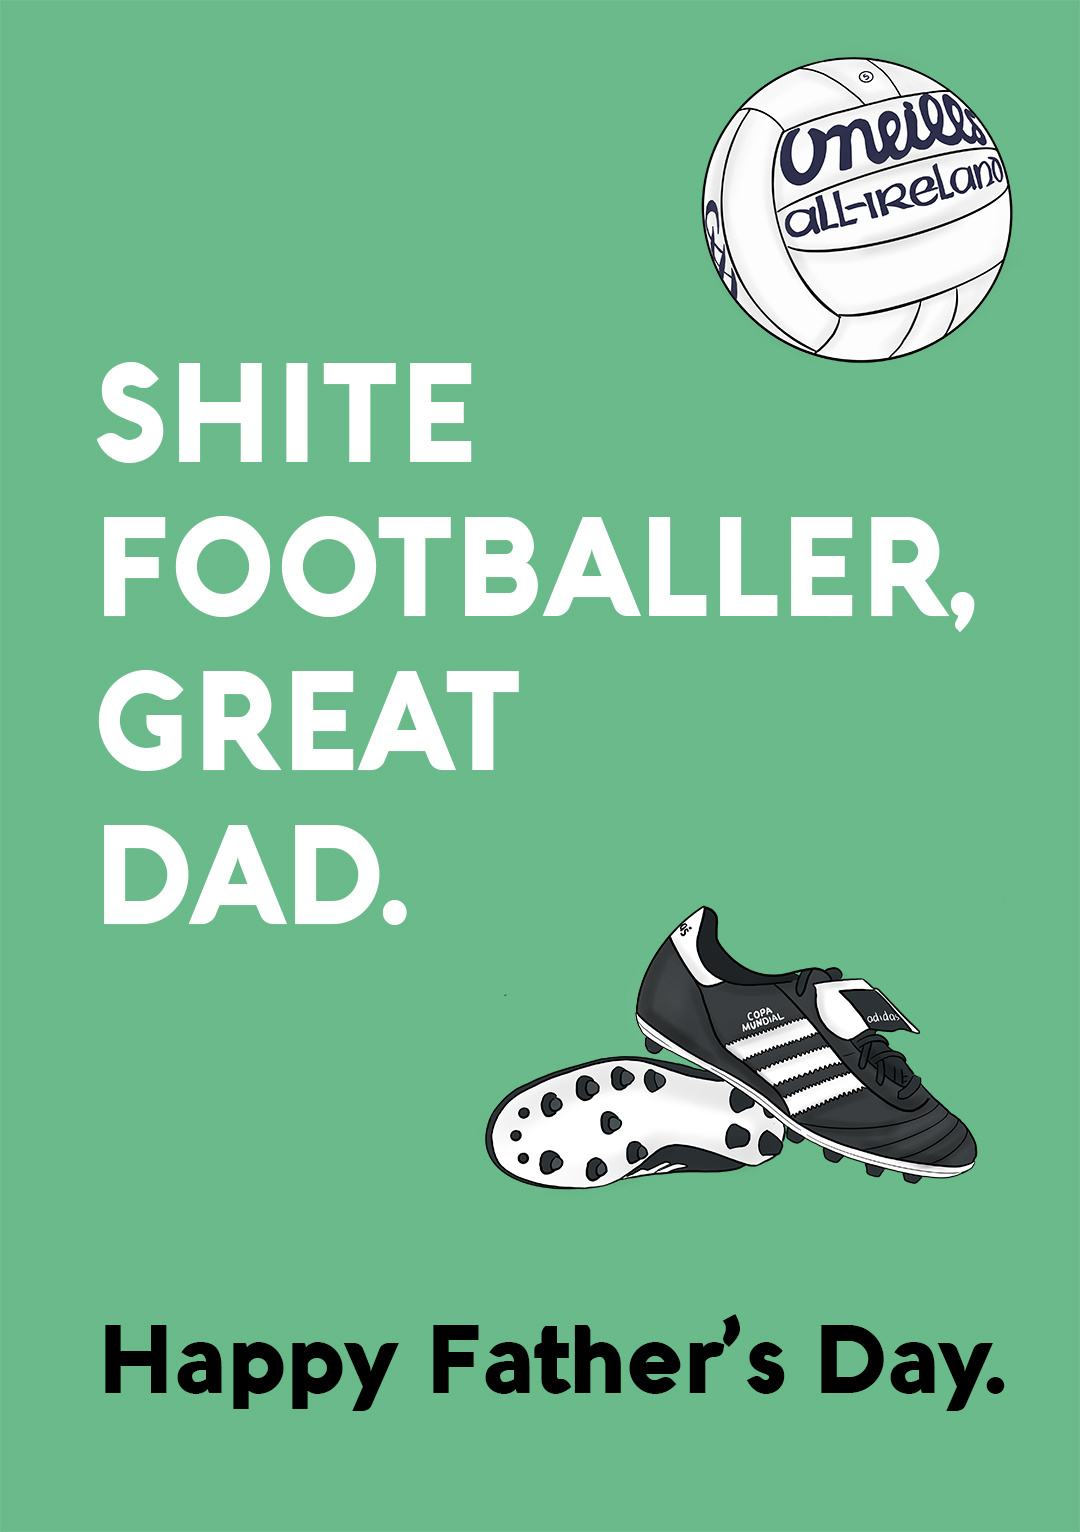 Shite Footballer, Great Dad - Happy Father's Day